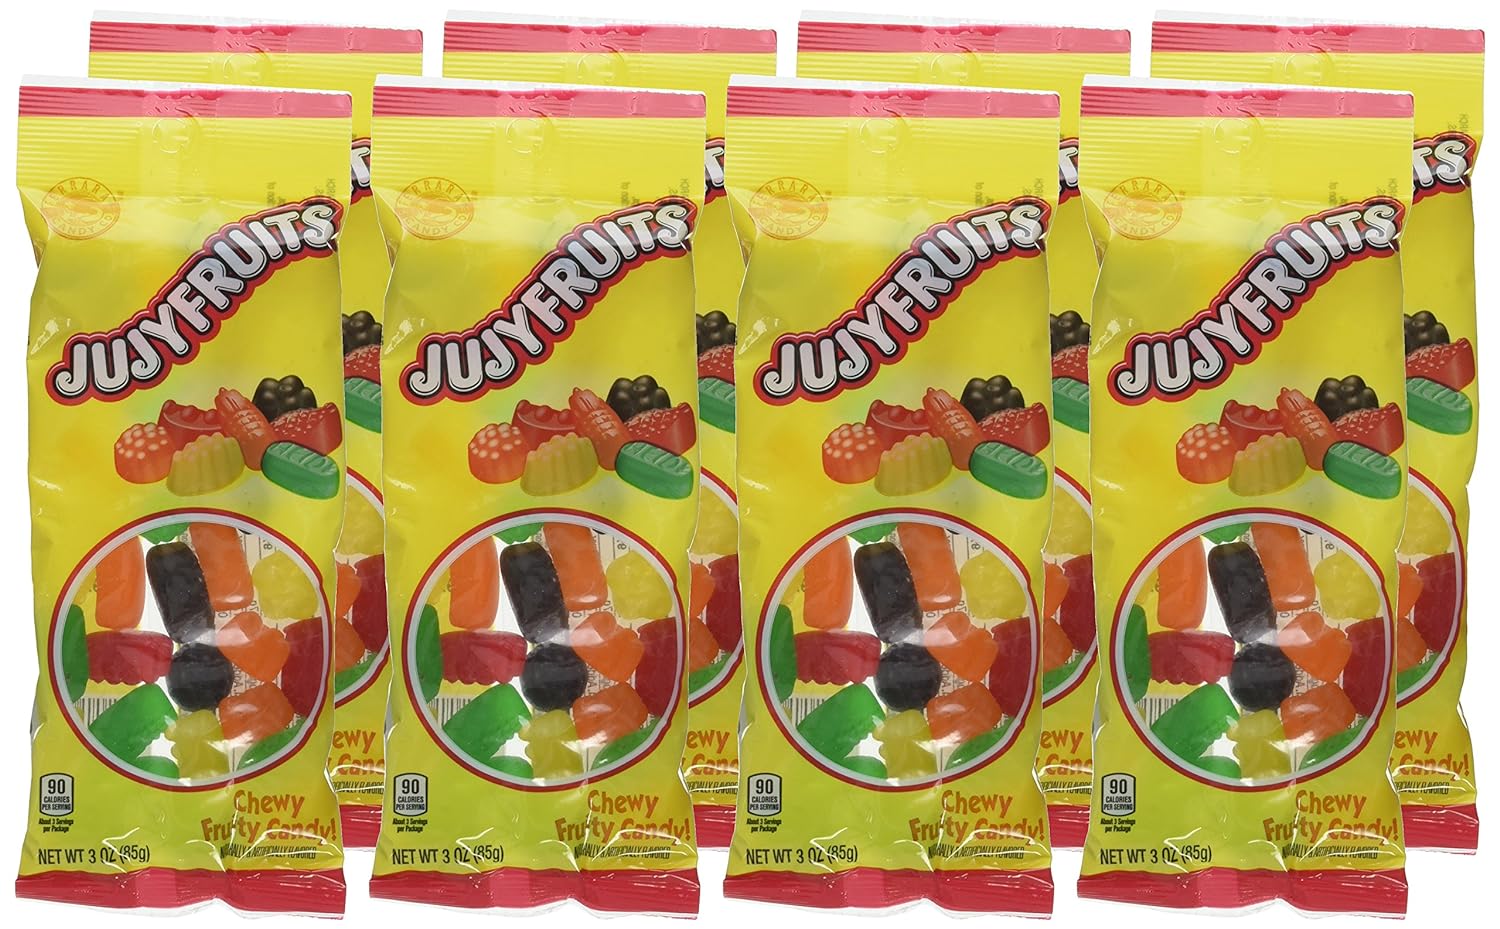  Jujyfruits Candy, 3 Ounce, Pack of 8